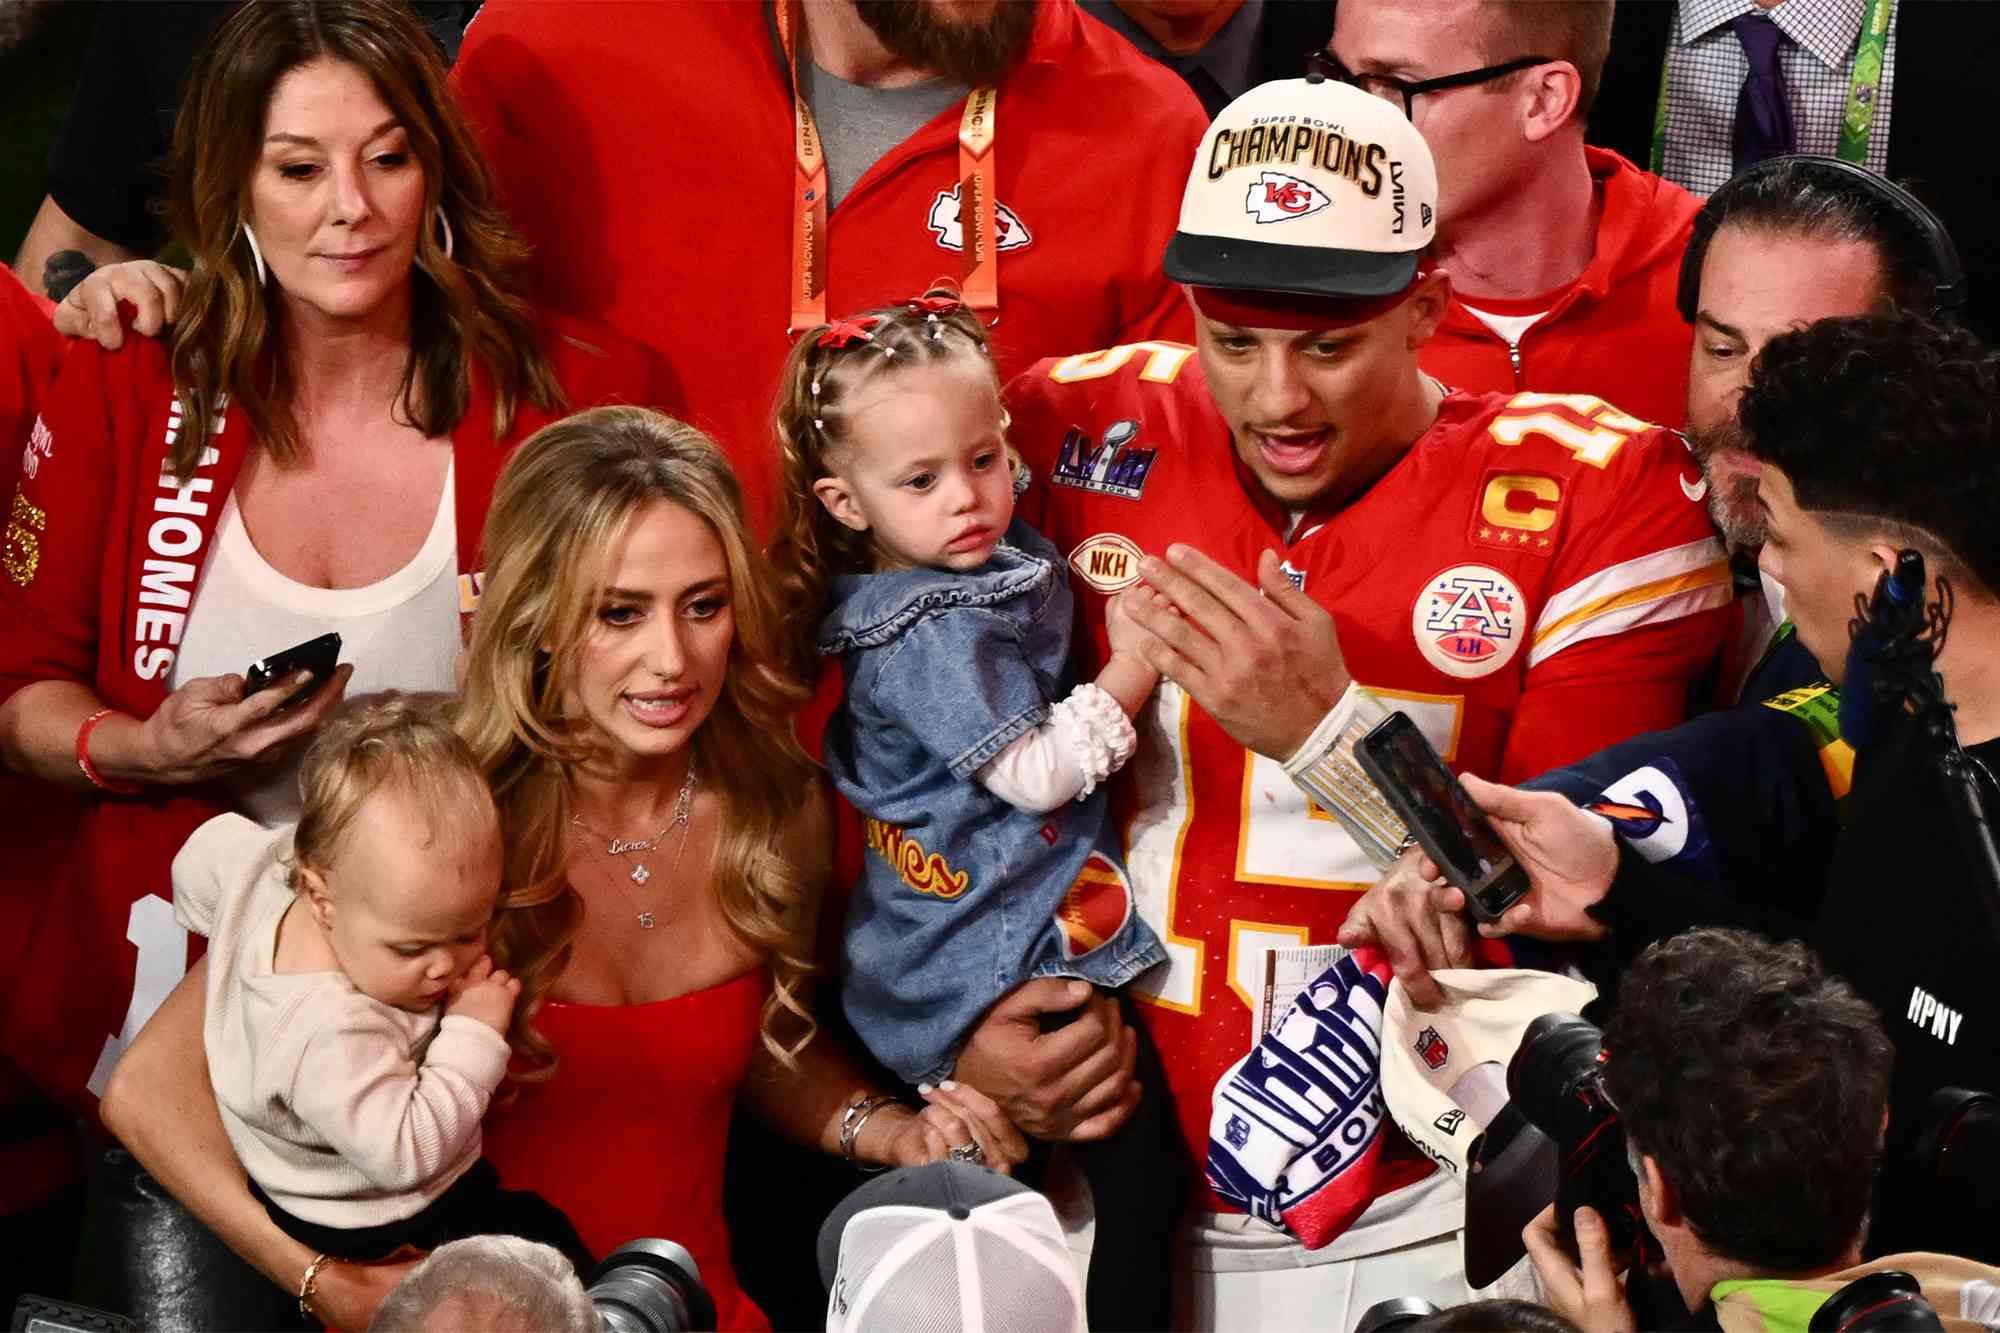 Kansas City Chiefs' quarterback #15 Patrick Mahomes with his wife Brittany Mahomes and their children Patrick Bronze and Sterling Skye celebrate winning Super Bowl LVIII against the San Francisco 49ers at Allegiant Stadium in Las Vegas, Nevada, February 11, 2024.